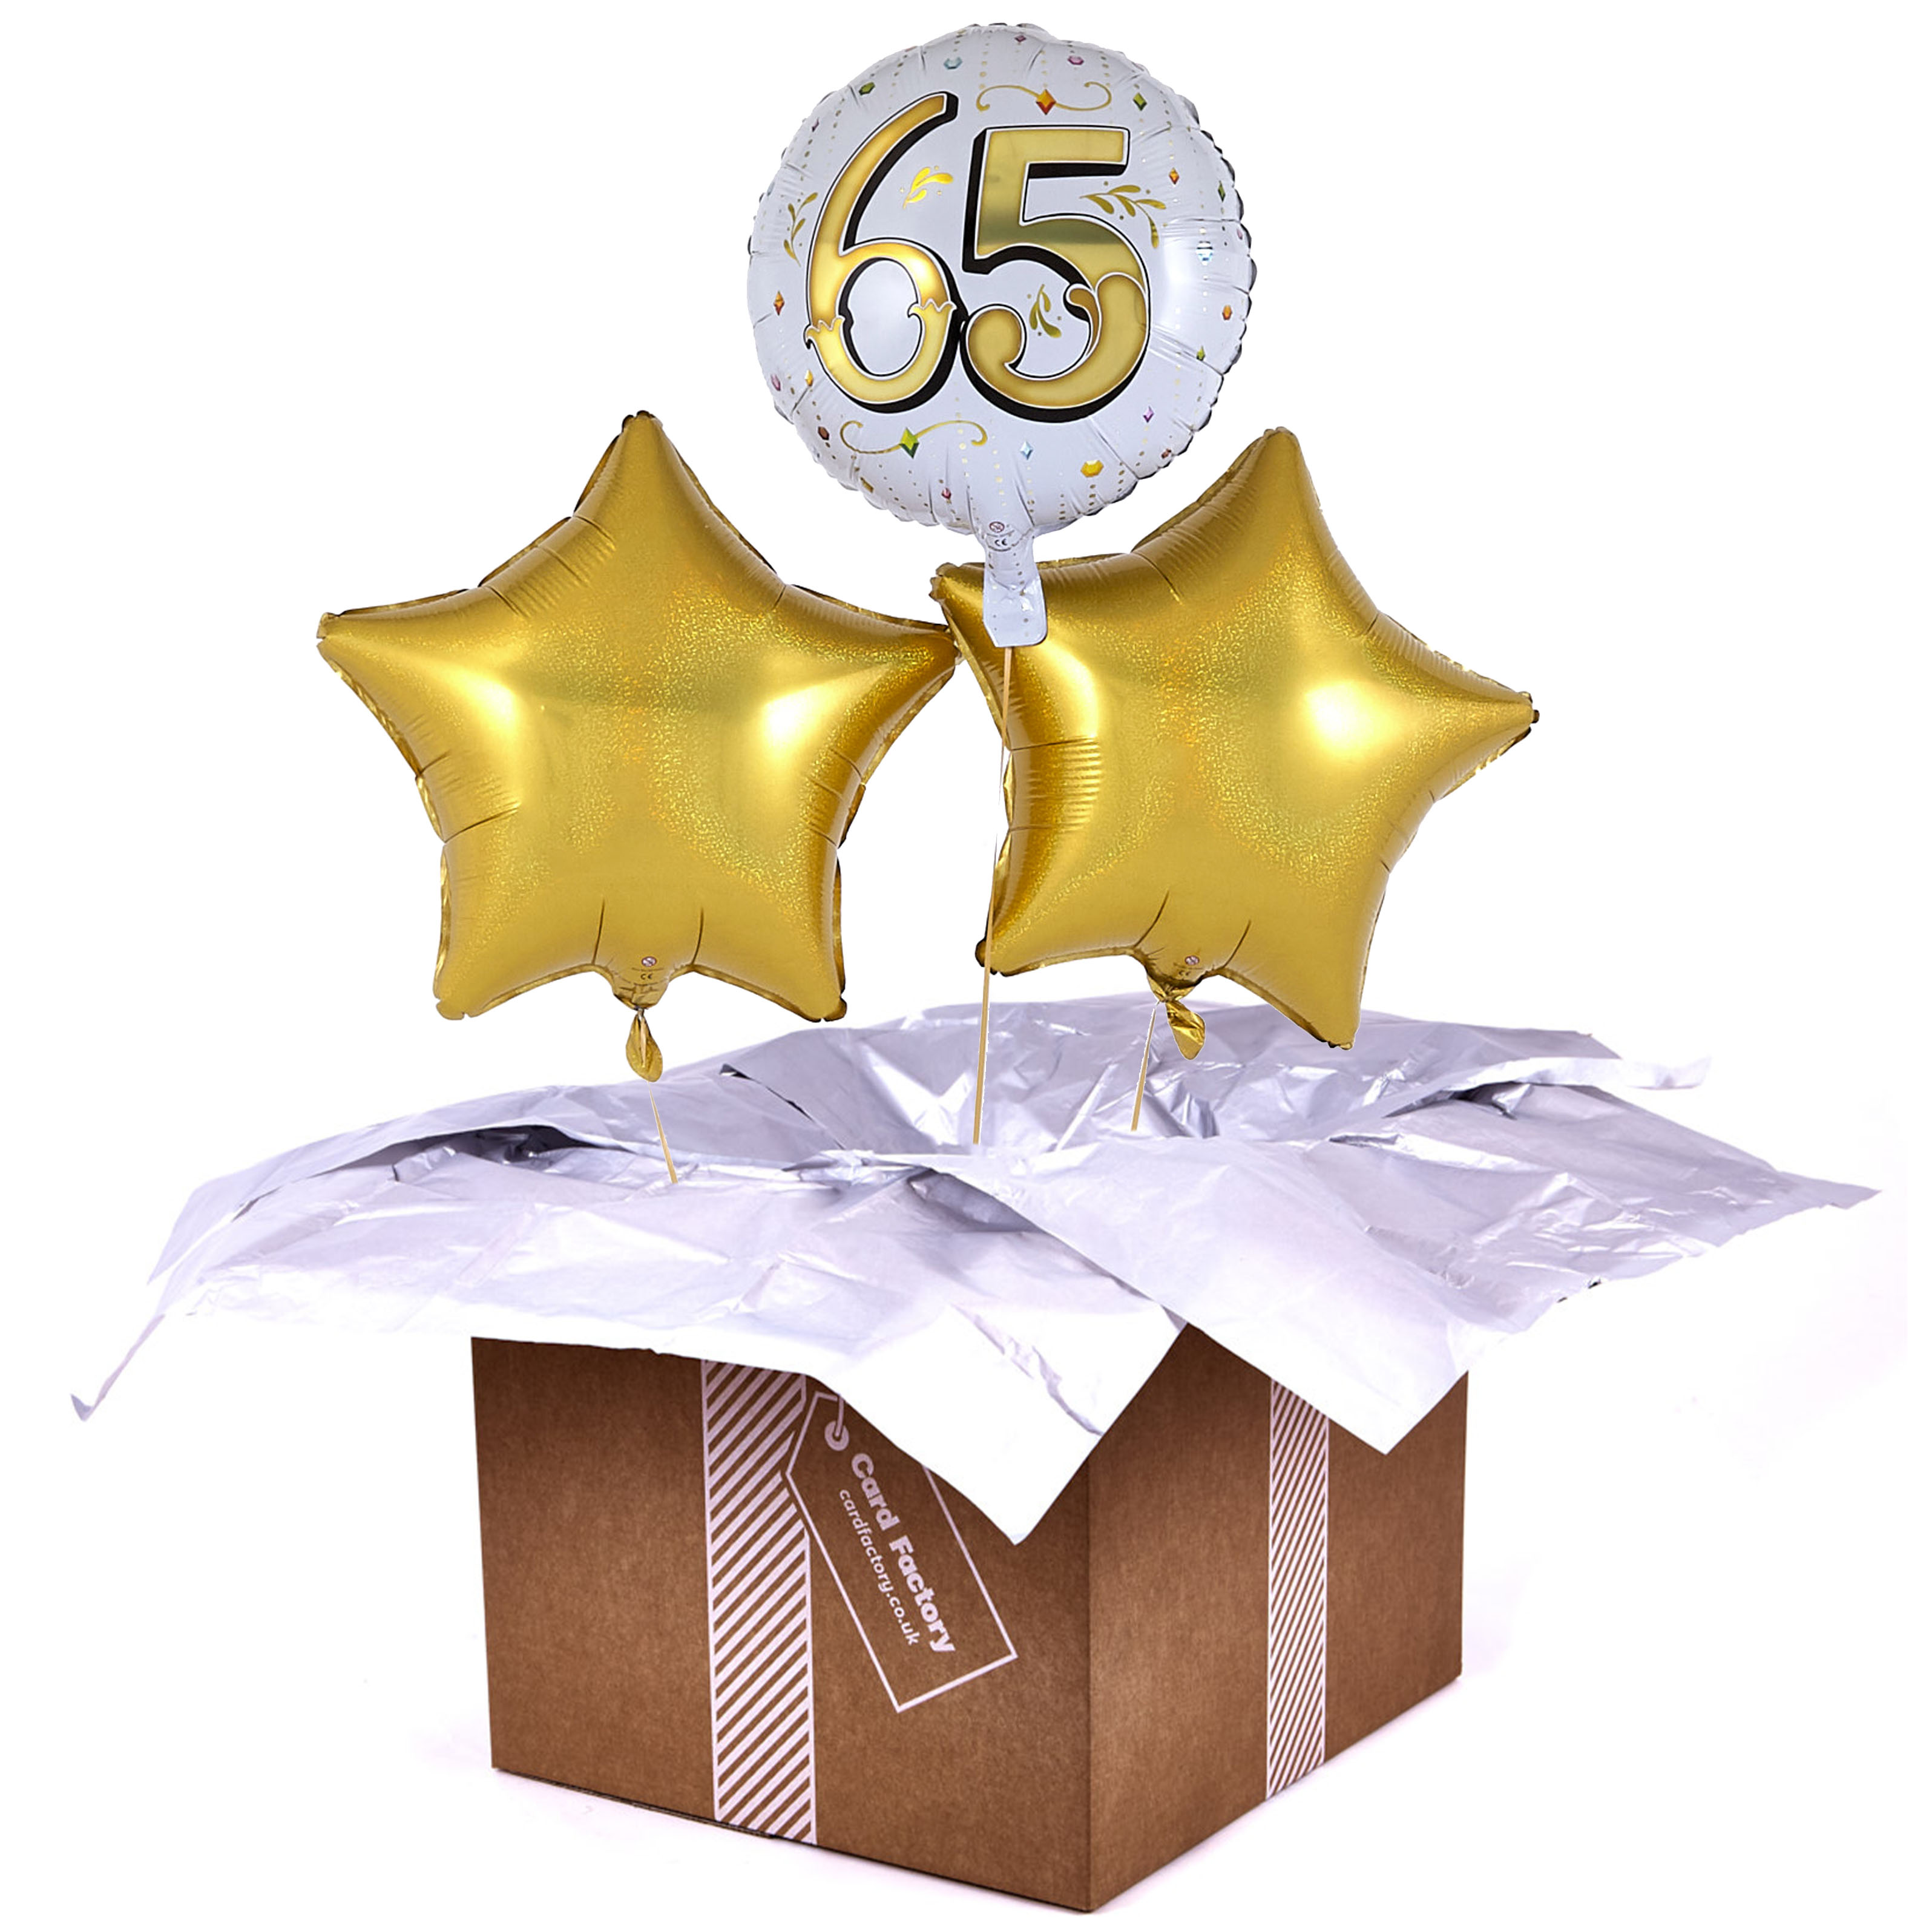 65th Birthday Gold Balloon Bouquet - DELIVERED INFLATED!